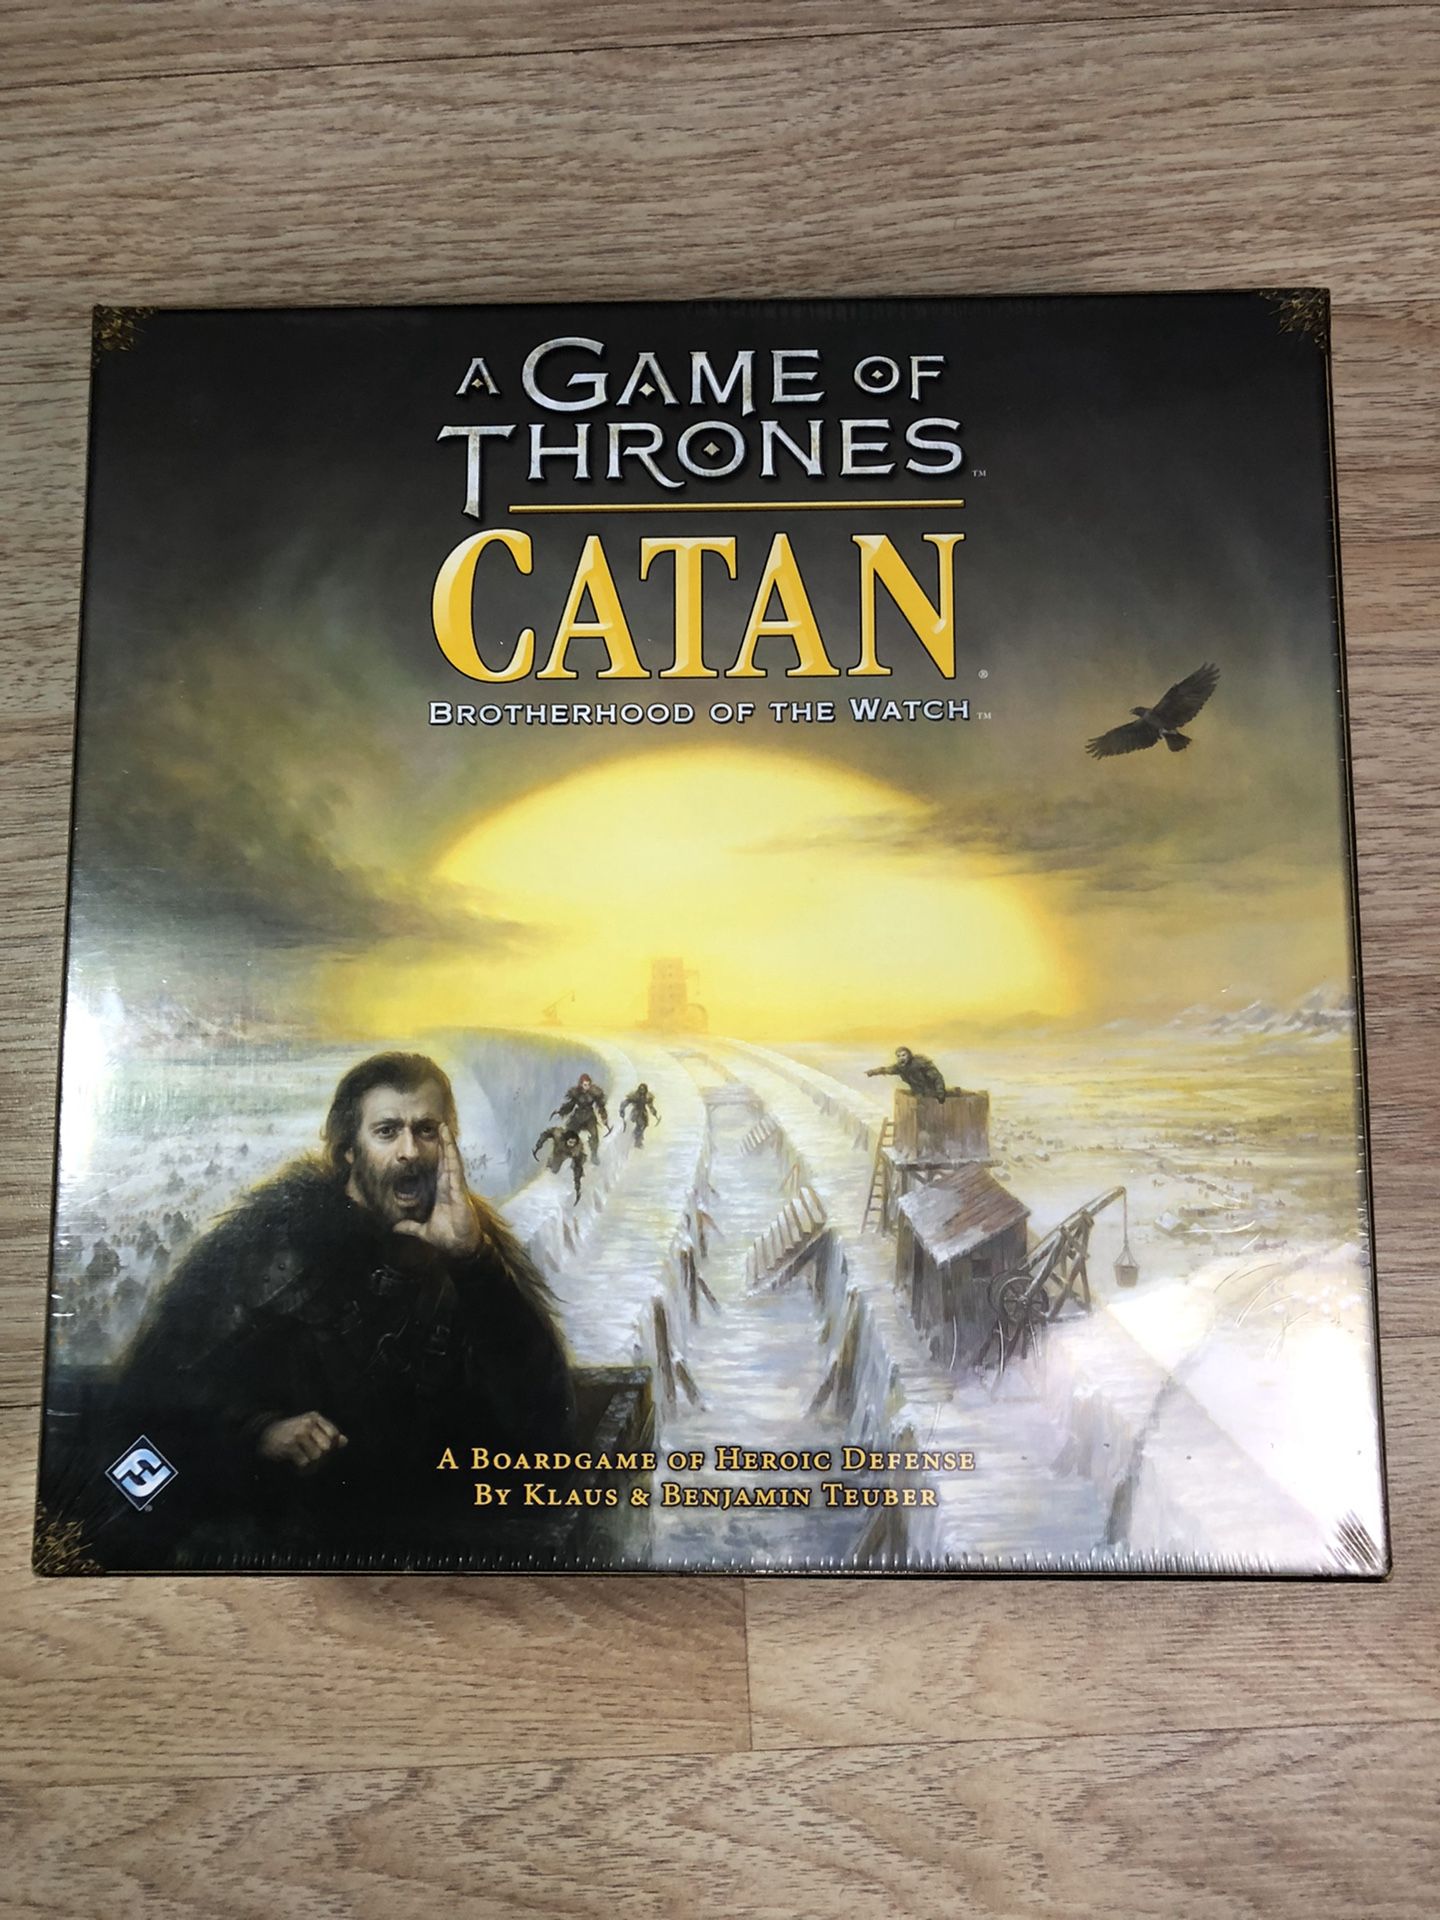 A Game of Thrones Catan: Brotherhood of the Watch Brand New Sealed!